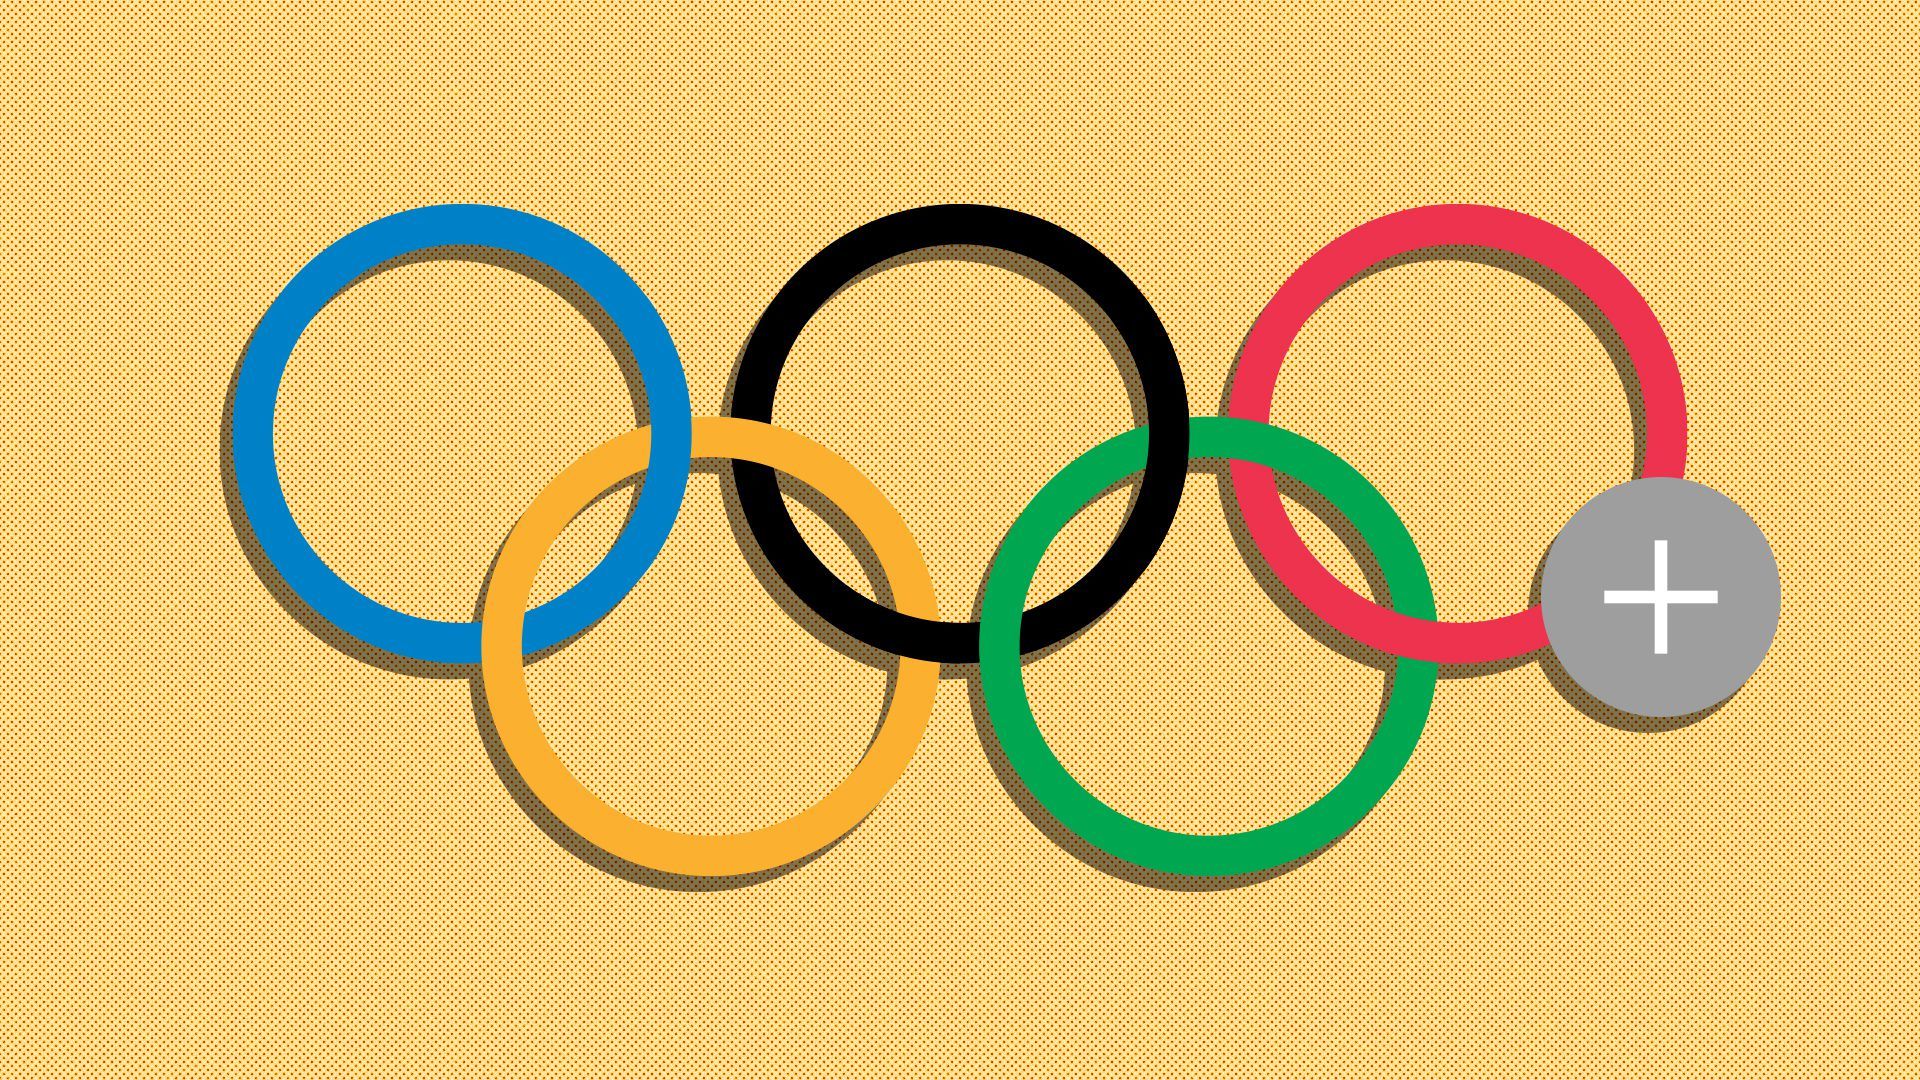 Illustration of the Olympic rings with a plus button